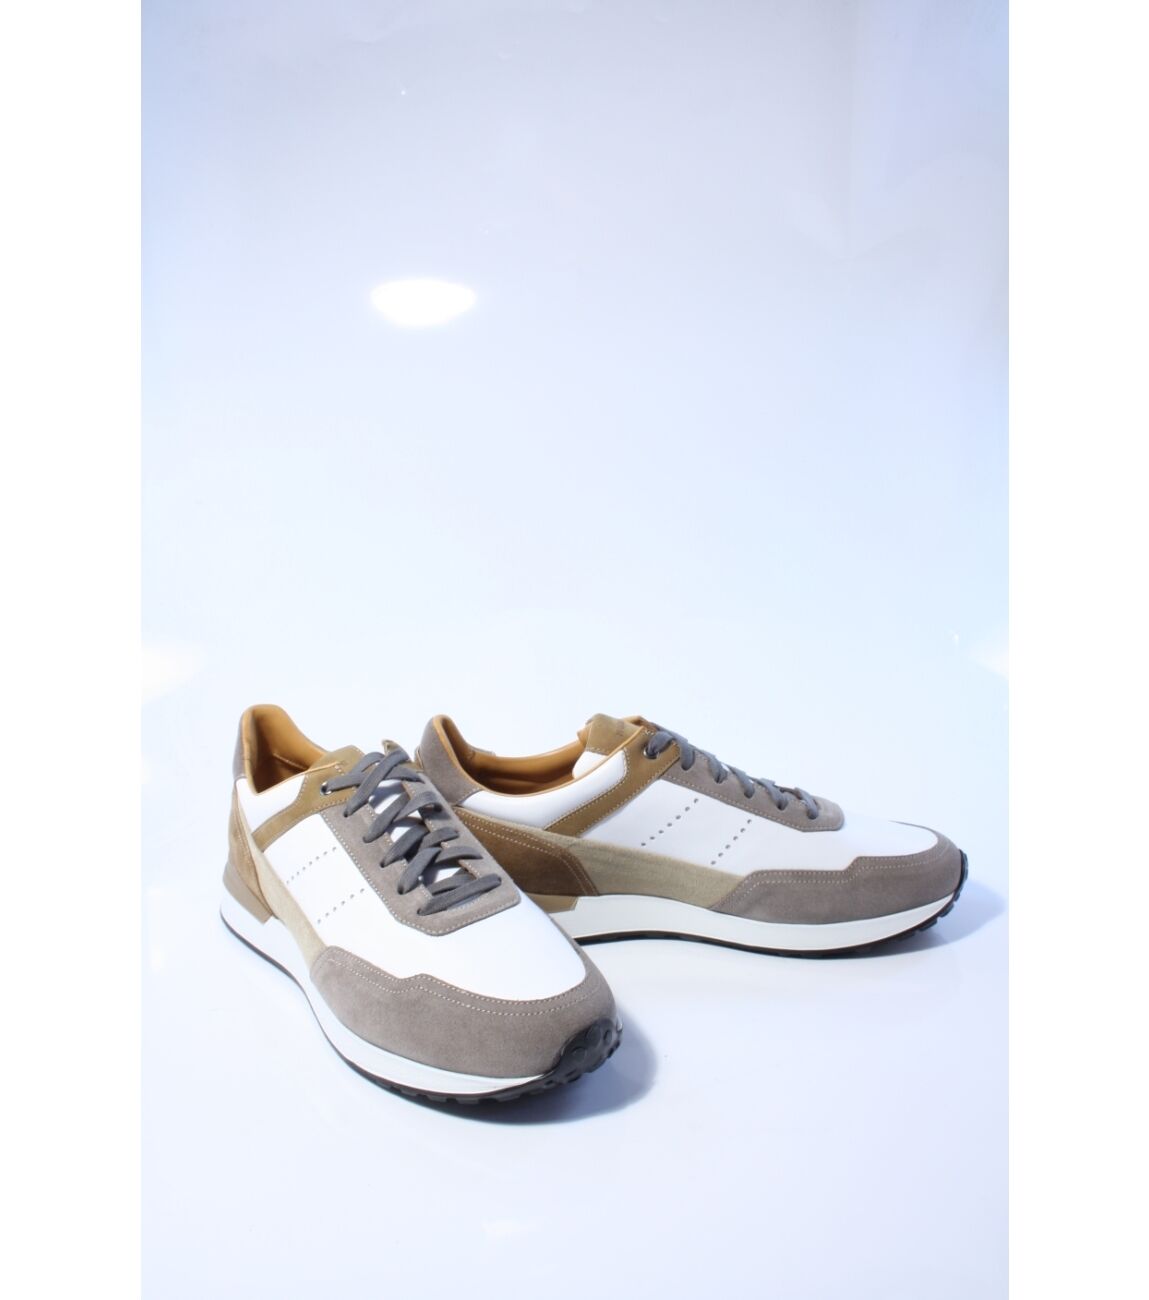 Magnanni Heren sneakers wit 43.5